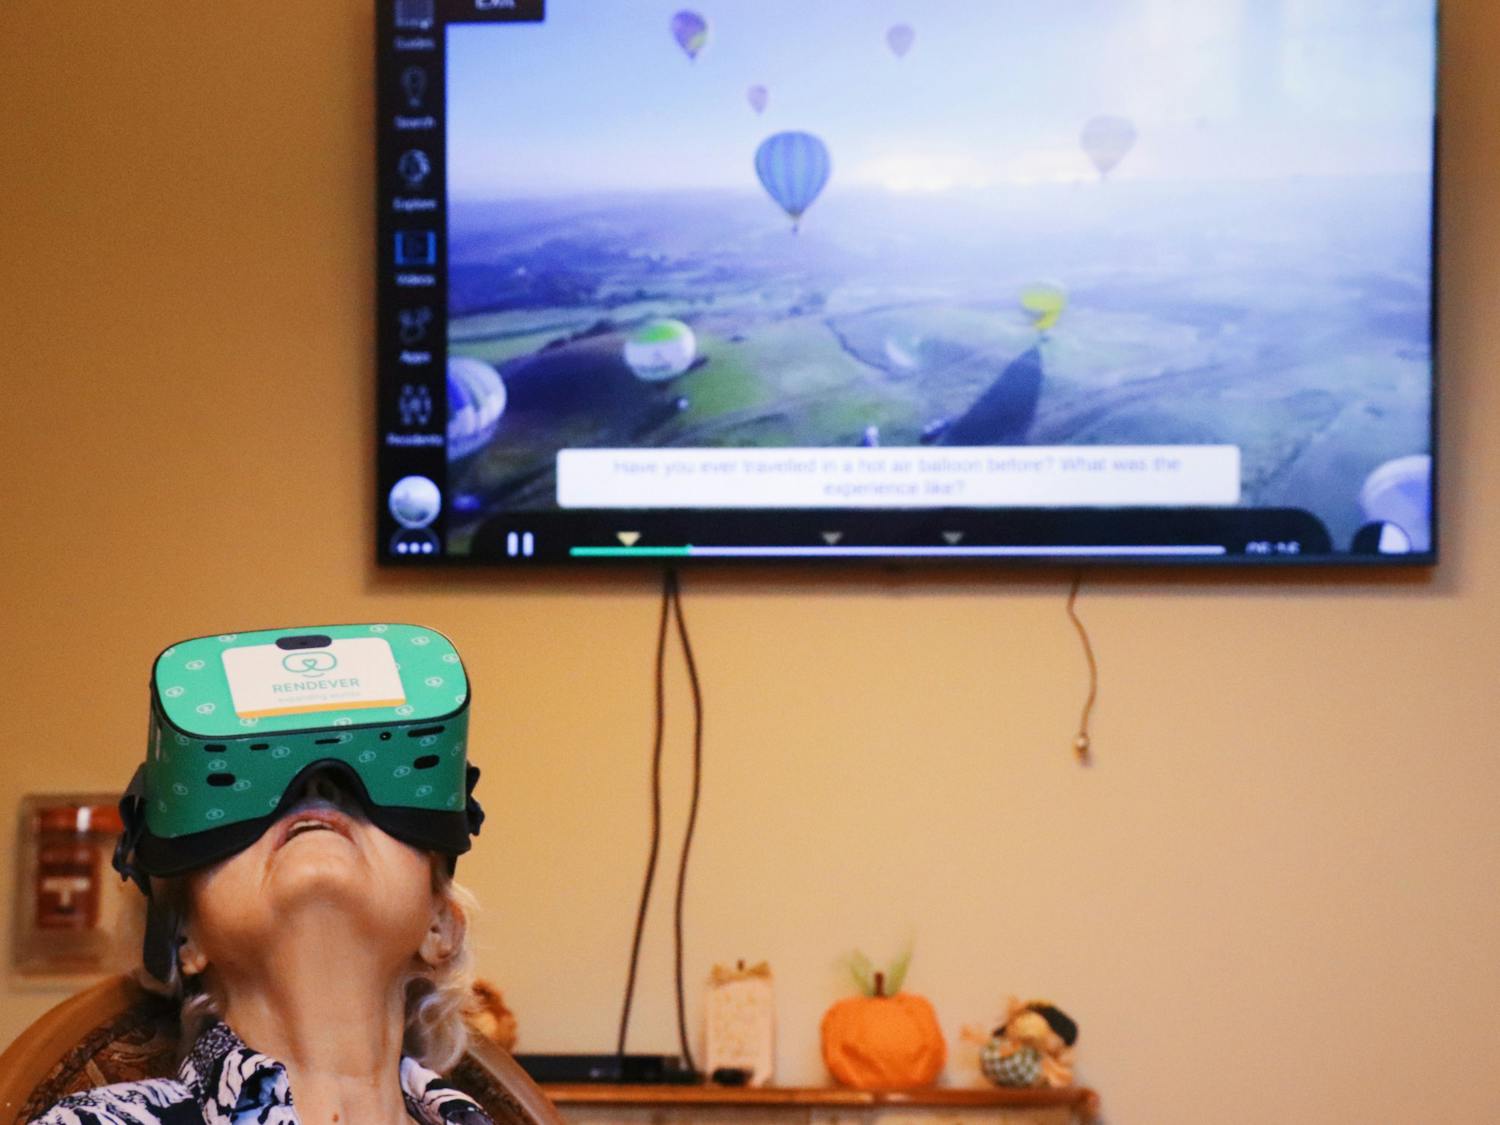 Kay Koons, 89, Oak Hammock resident, uses a Rendever virtual reality headset to take a hot-air balloon ride while at the Oak Hammock Health Pavilion on Wednesday, Oct. 20, 2021.